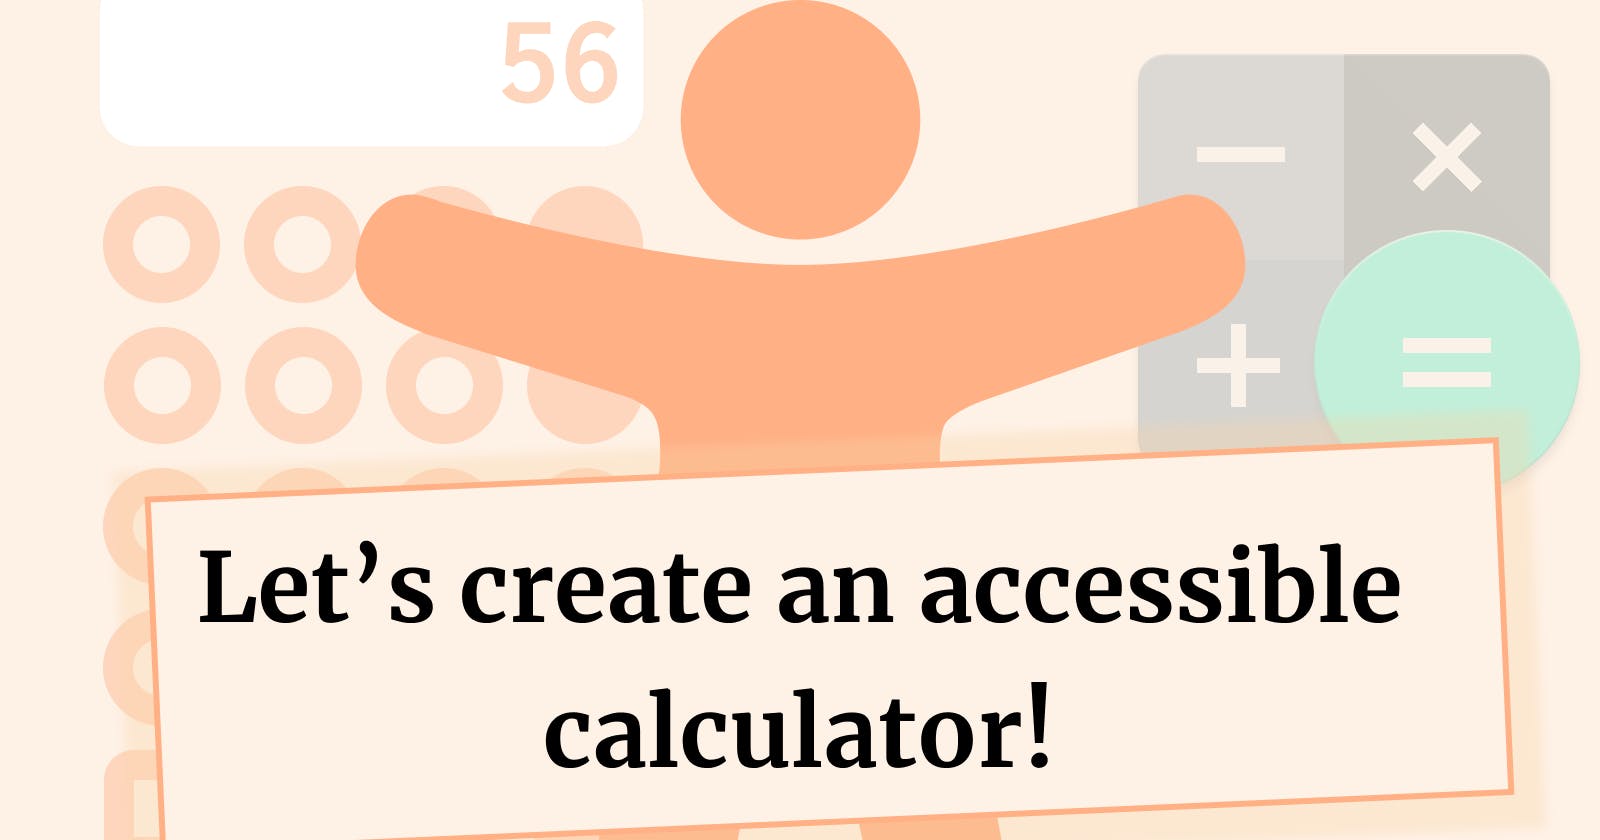 Let's create an accessible calculator!